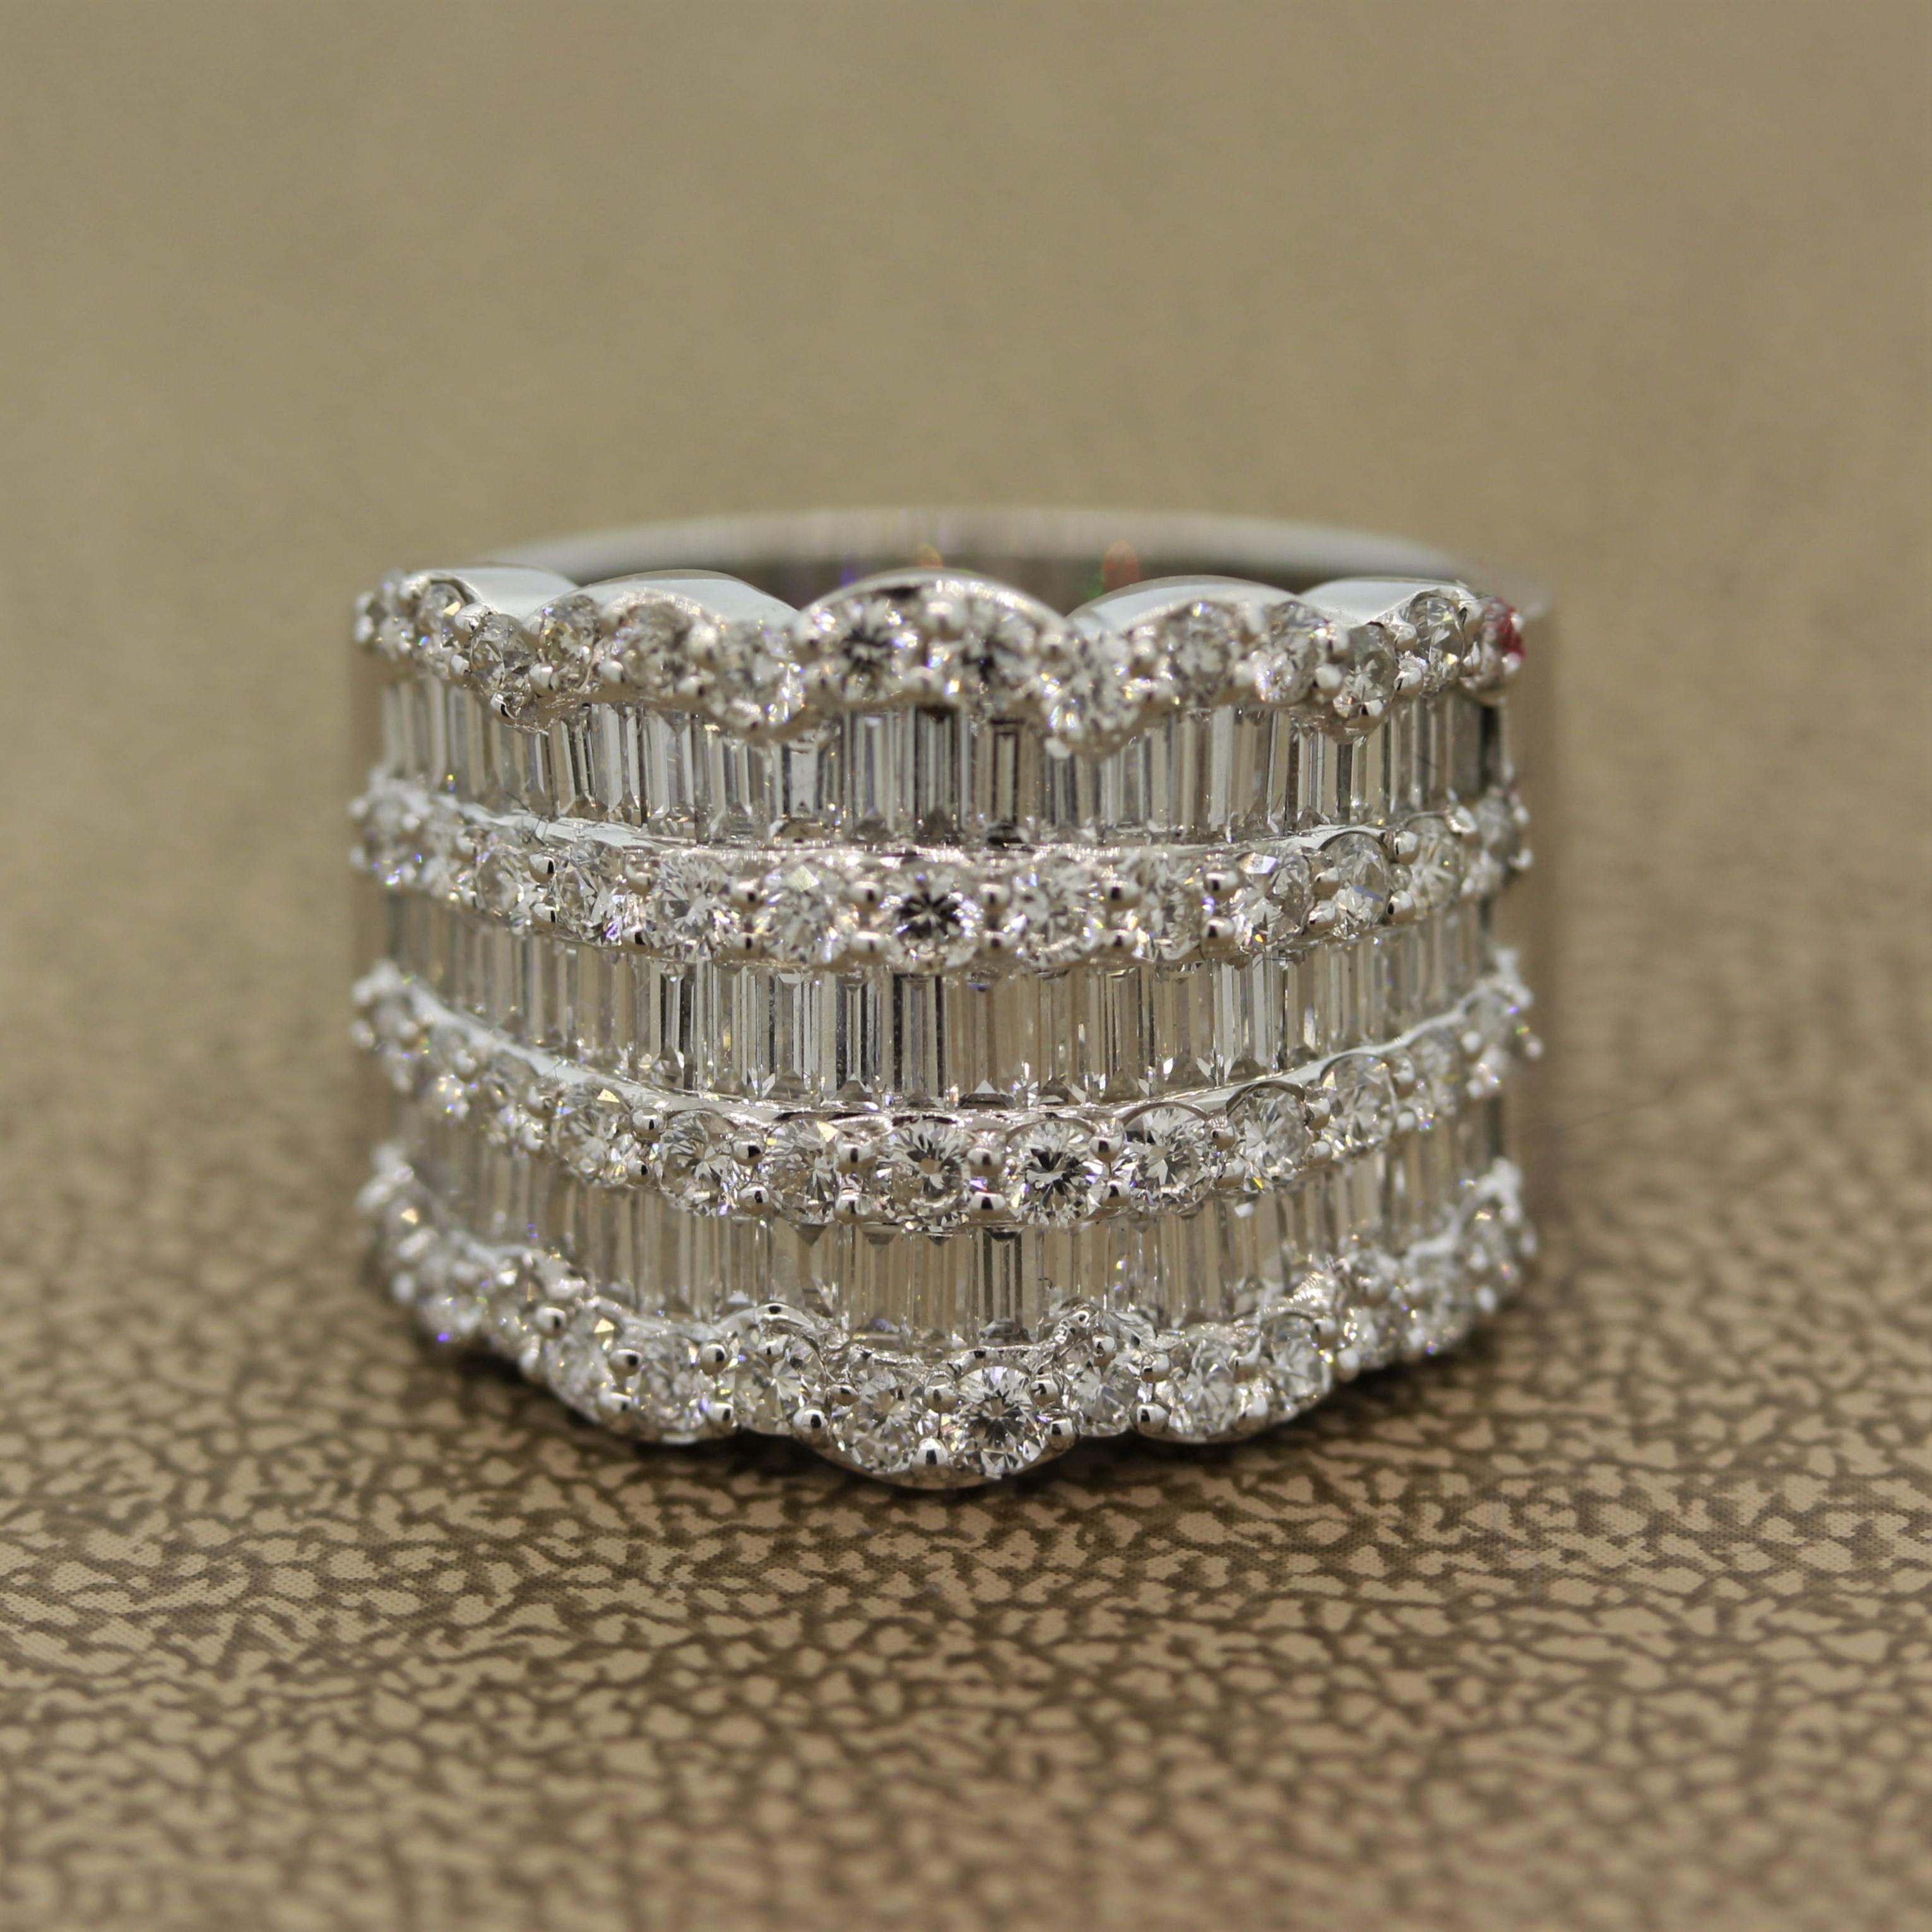 A classic wide diamond band ring featuring round brilliant cut diamonds along with baguette cut diamonds which are channel set in between the rounds. The total diamond weight is 2.71 carats and they are VS in clarity and have a color of F-G.

Ring